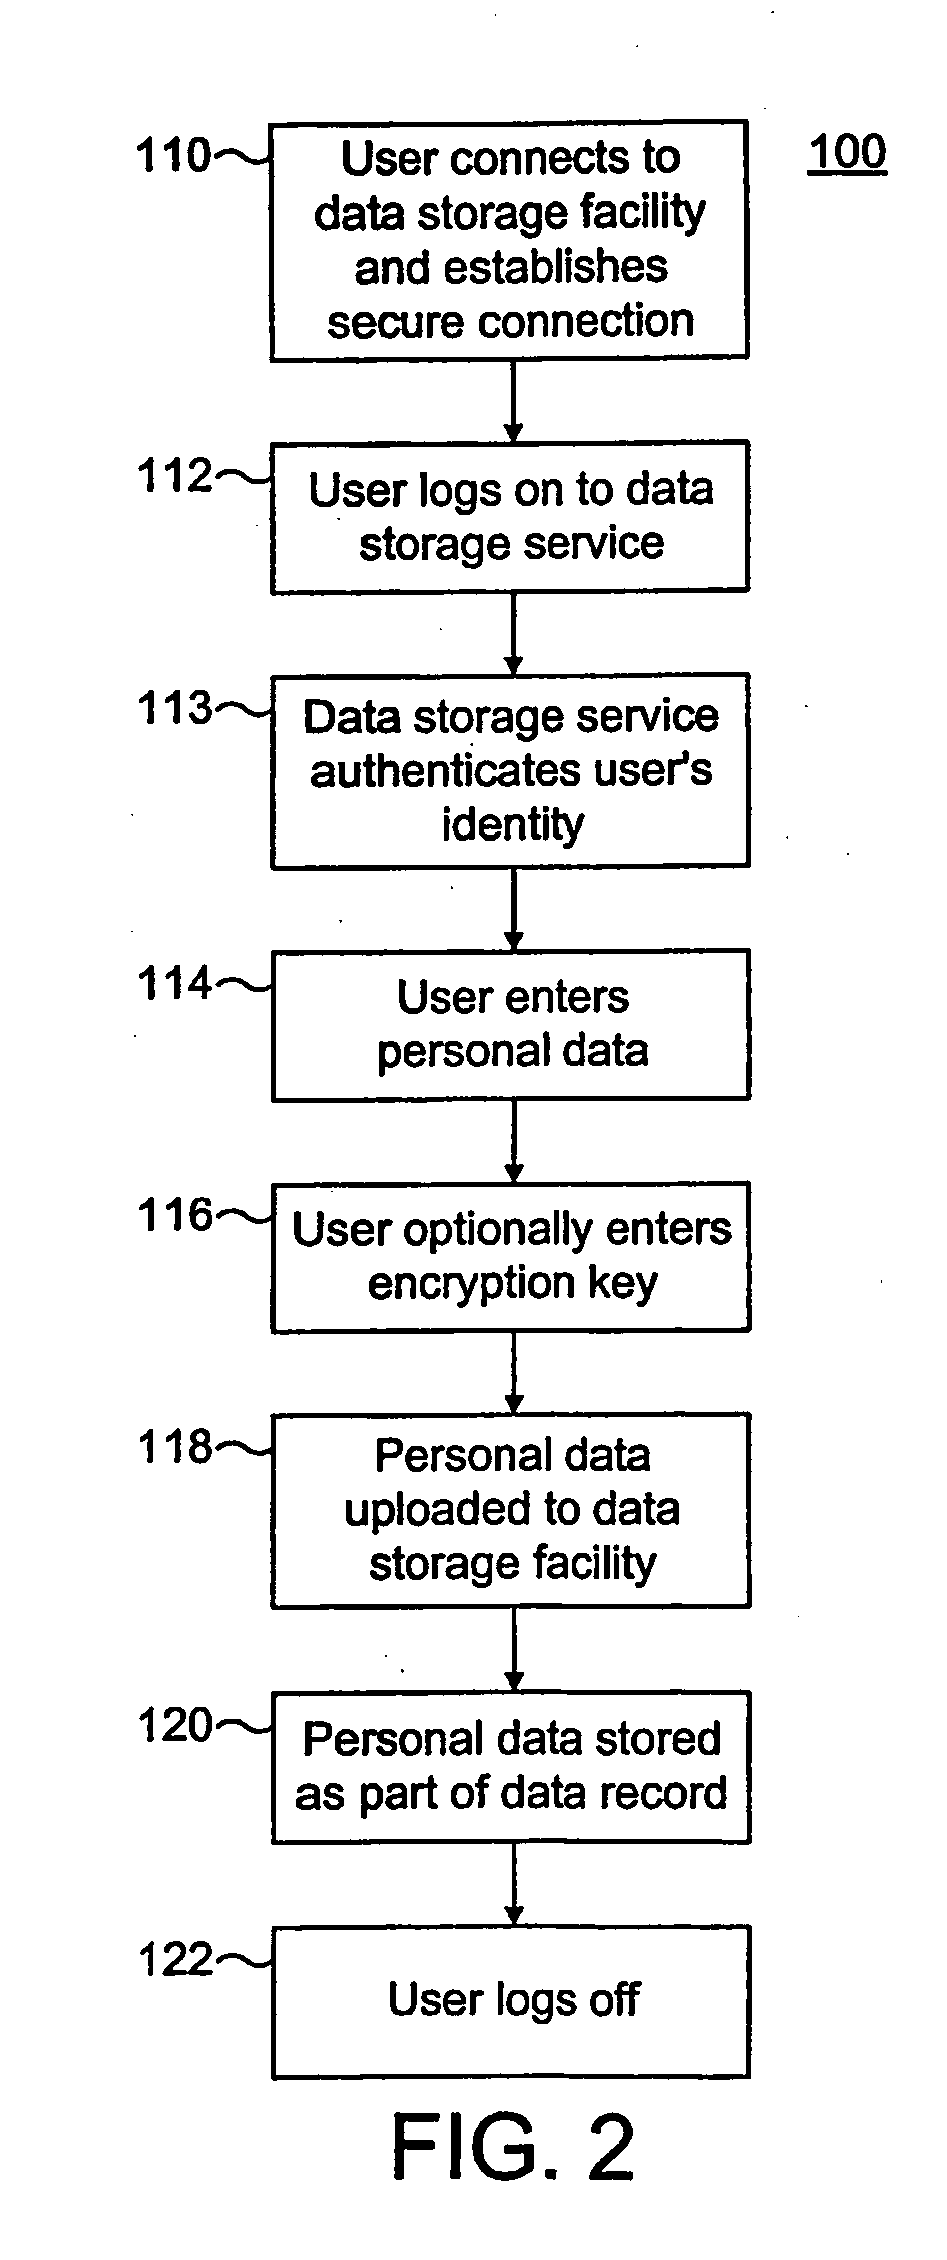 Portable storage device for storing and accessing personal data